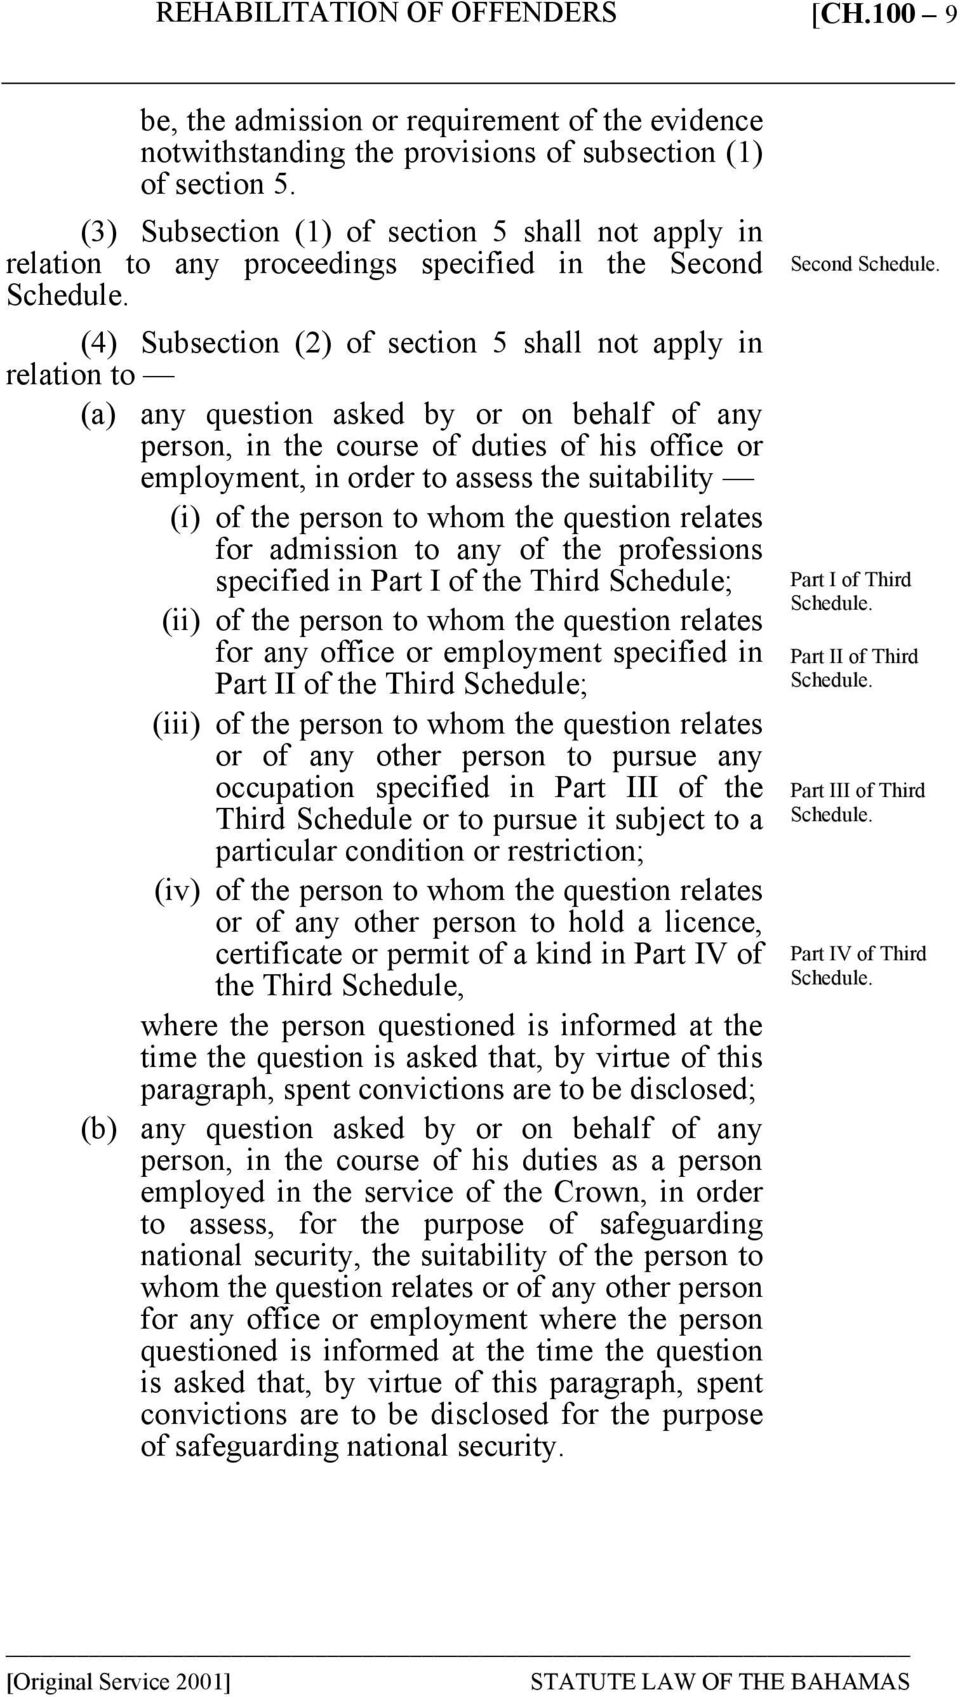 (4) Subsection (2) of section 5 shall not apply in relation to (a) any question asked by or on behalf of any person, in the course of duties of his office or employment, in order to assess the